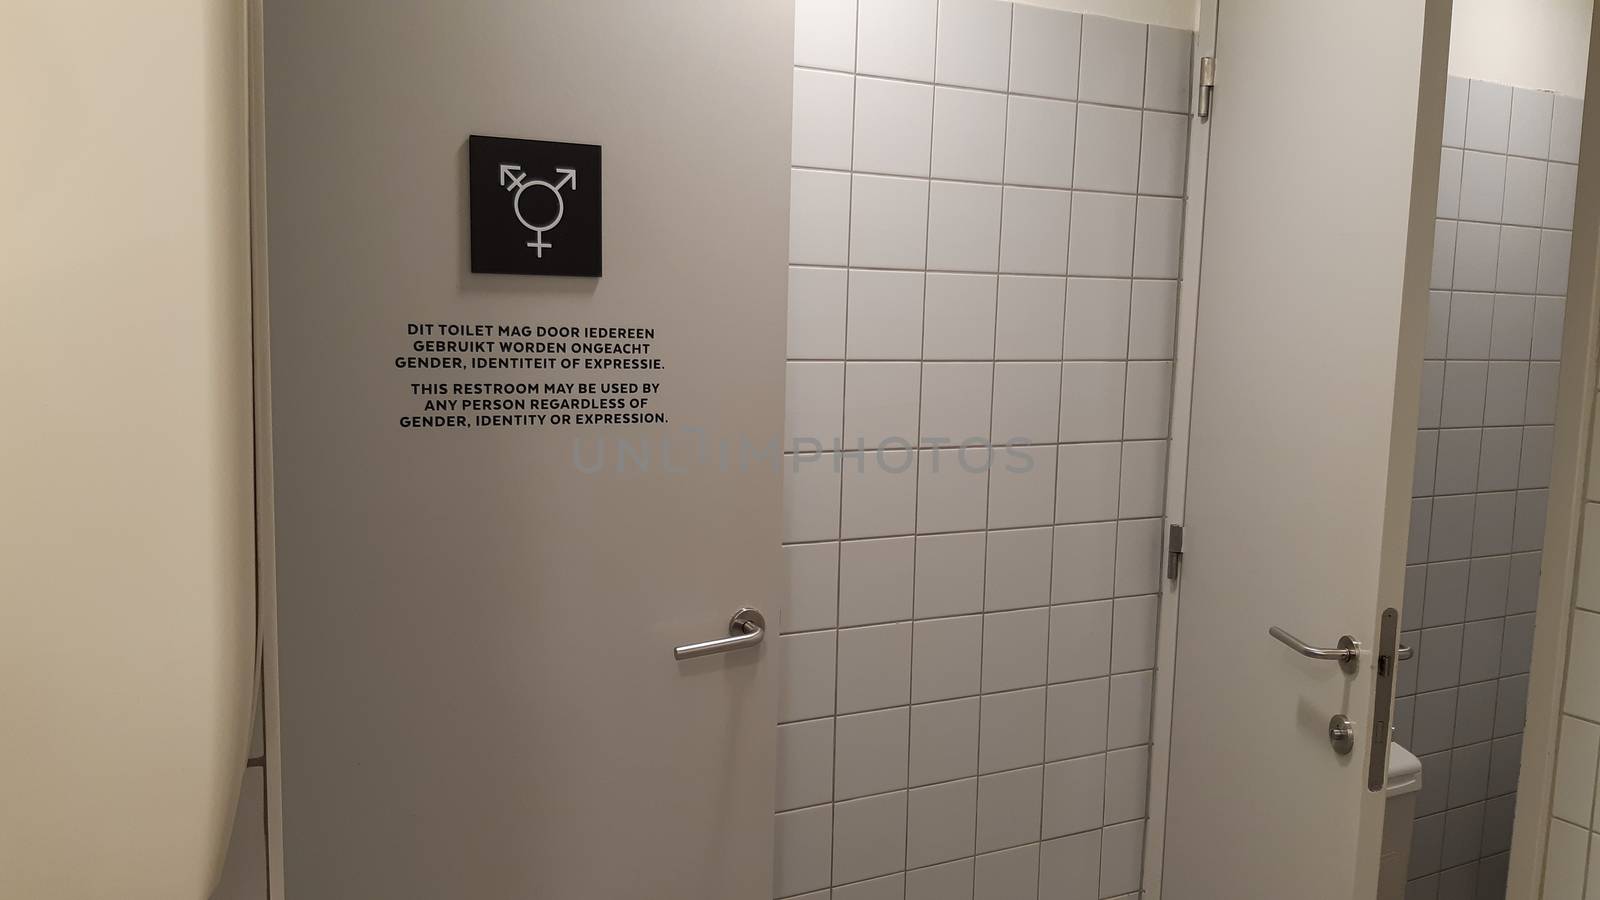 Gender neutral toilet symbol and sign on a door, in Dutch and English language by kb79